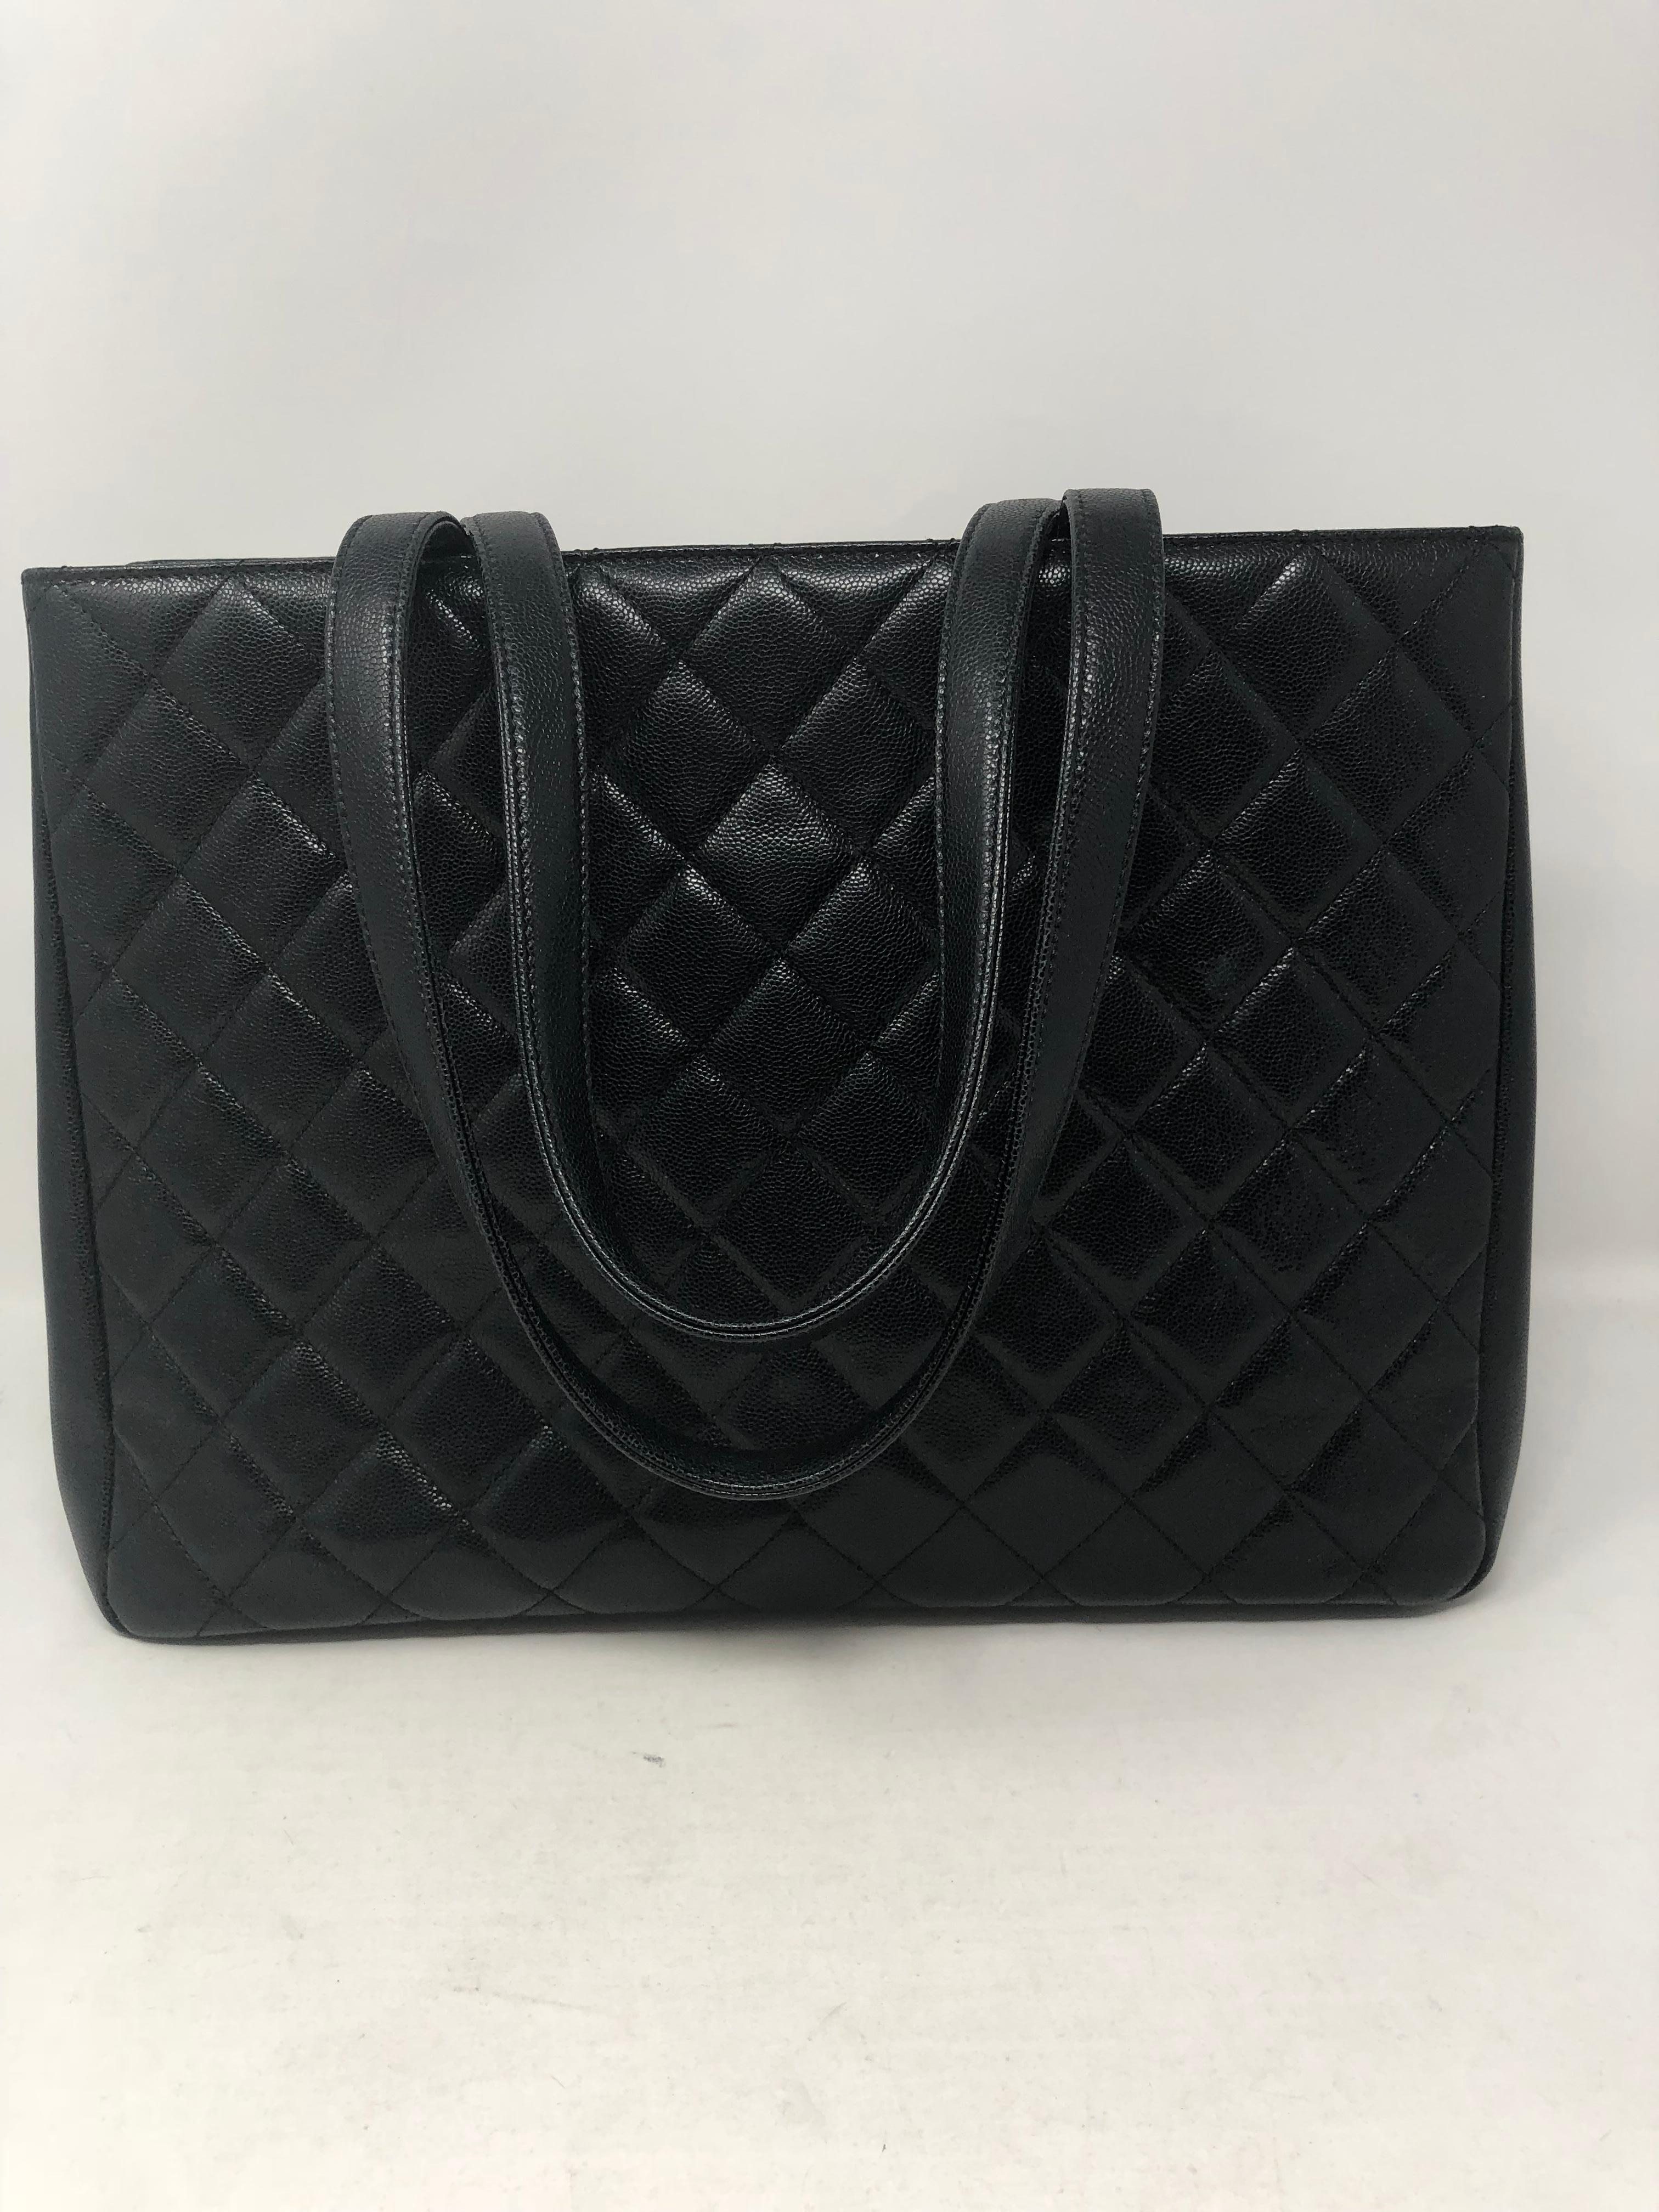 chanel business affinity tote